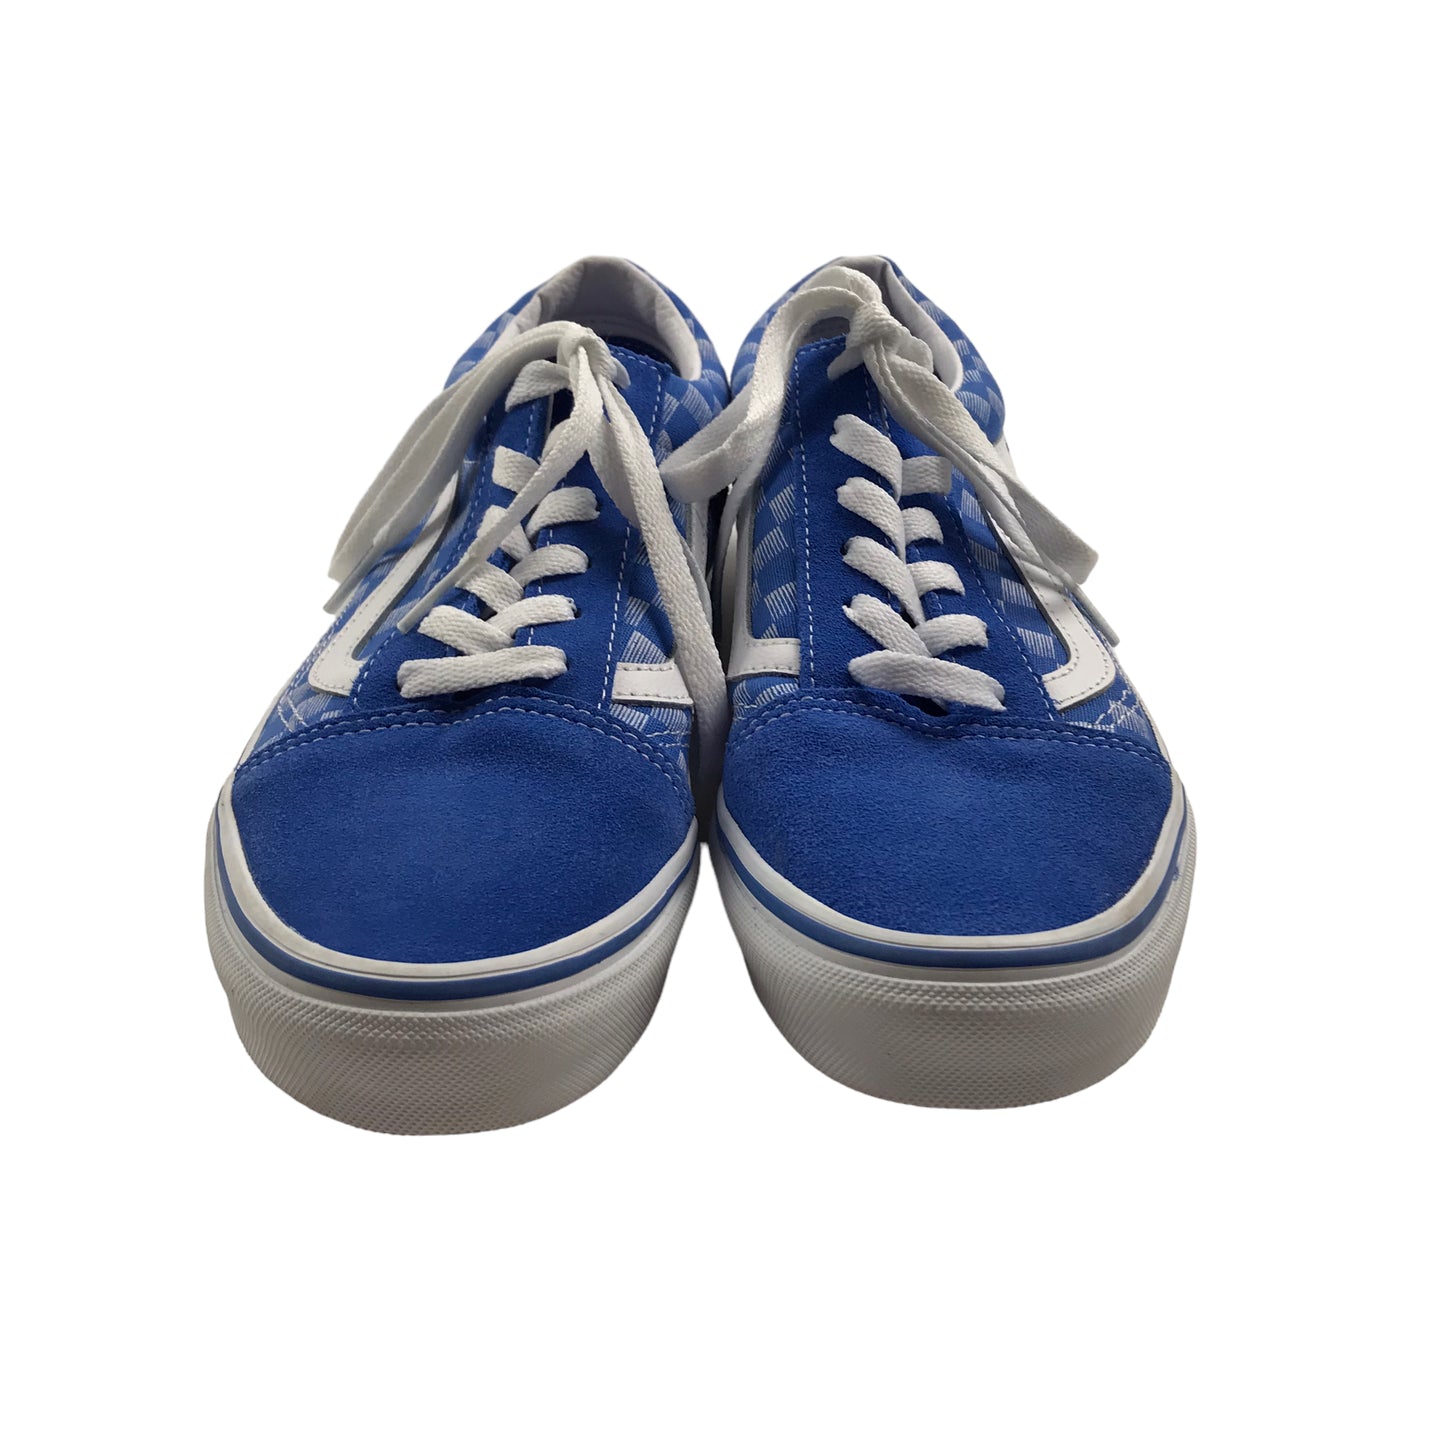 Vans Royal Blue and White Trainers Shoe Size 5